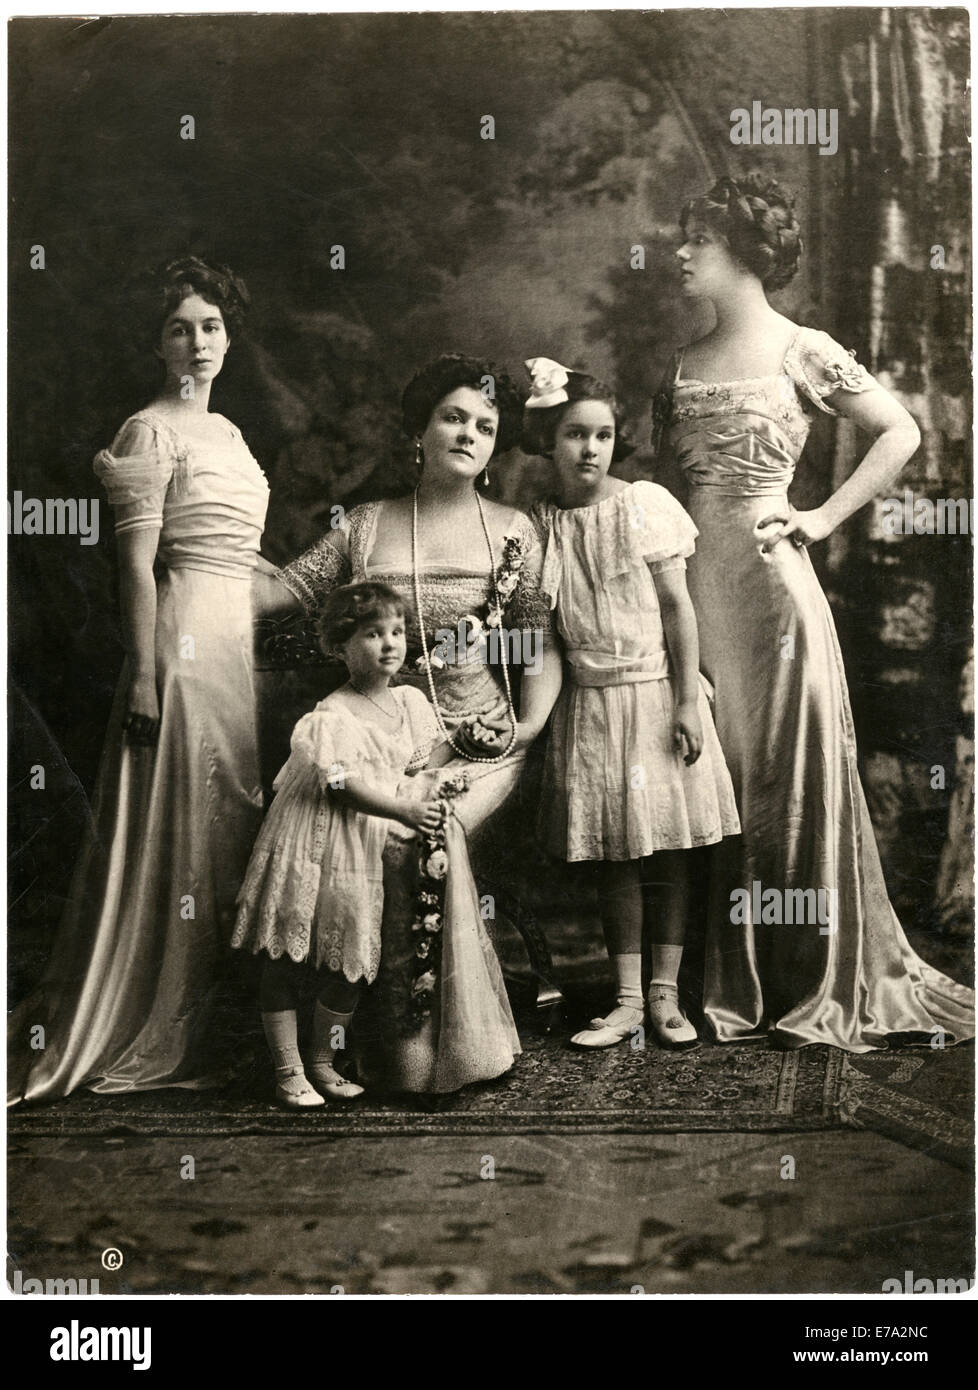 Mrs. George Gould (Edith Kingdon) with Daughters Helen, Gloria, Edith, and Marjorie, Portrait, 1910 Stock Photo